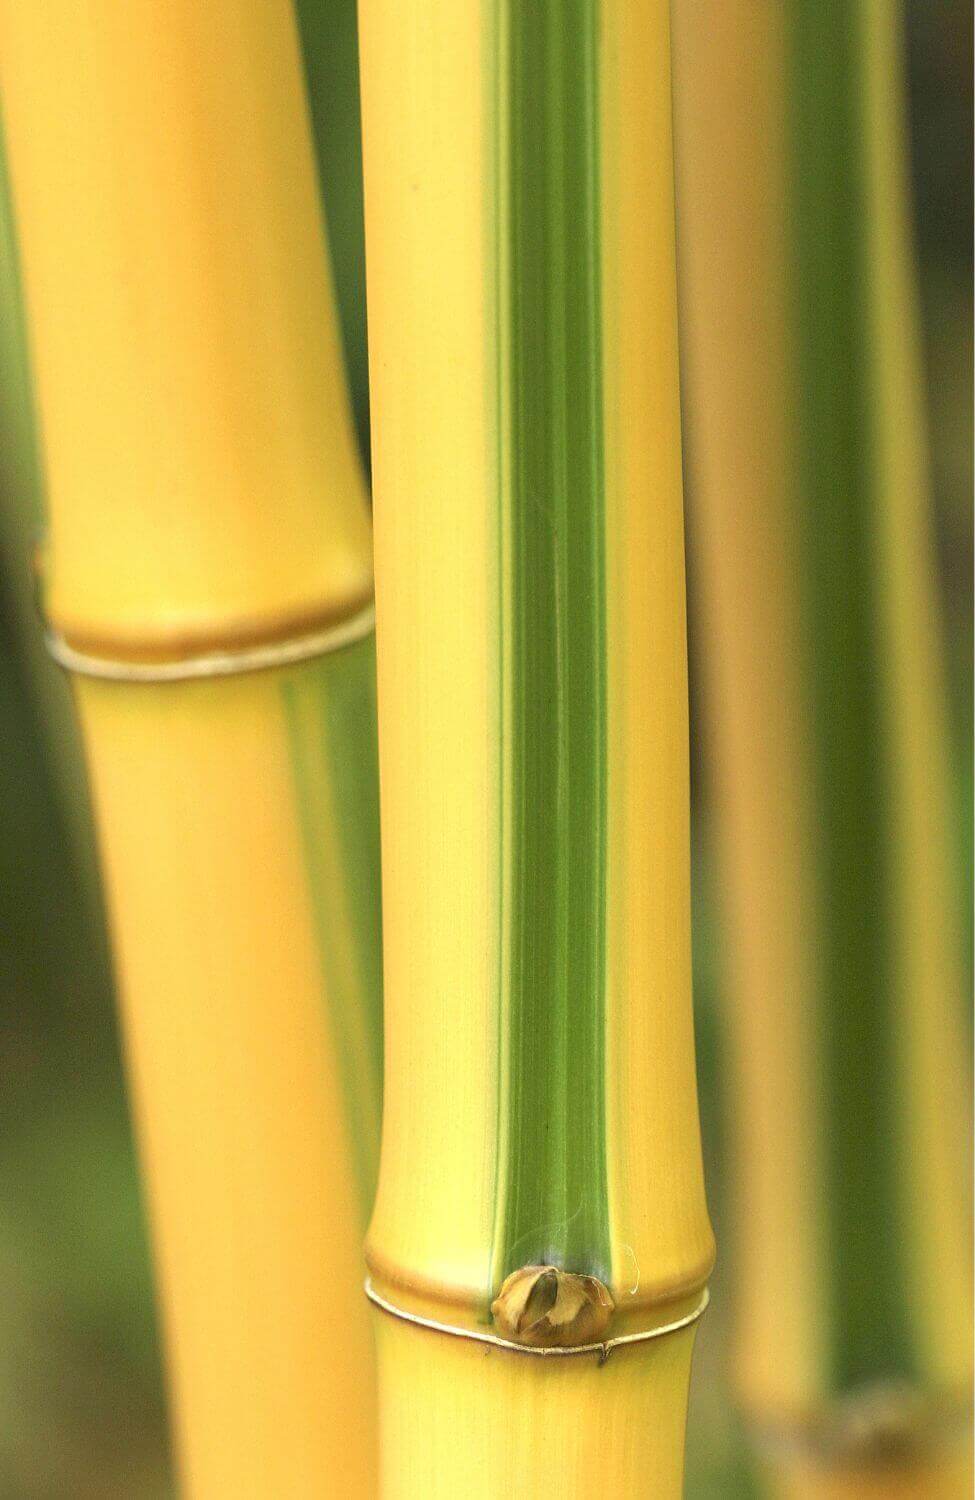 Enhance Your Garden with Bicolor Striped Bamboo Seeds